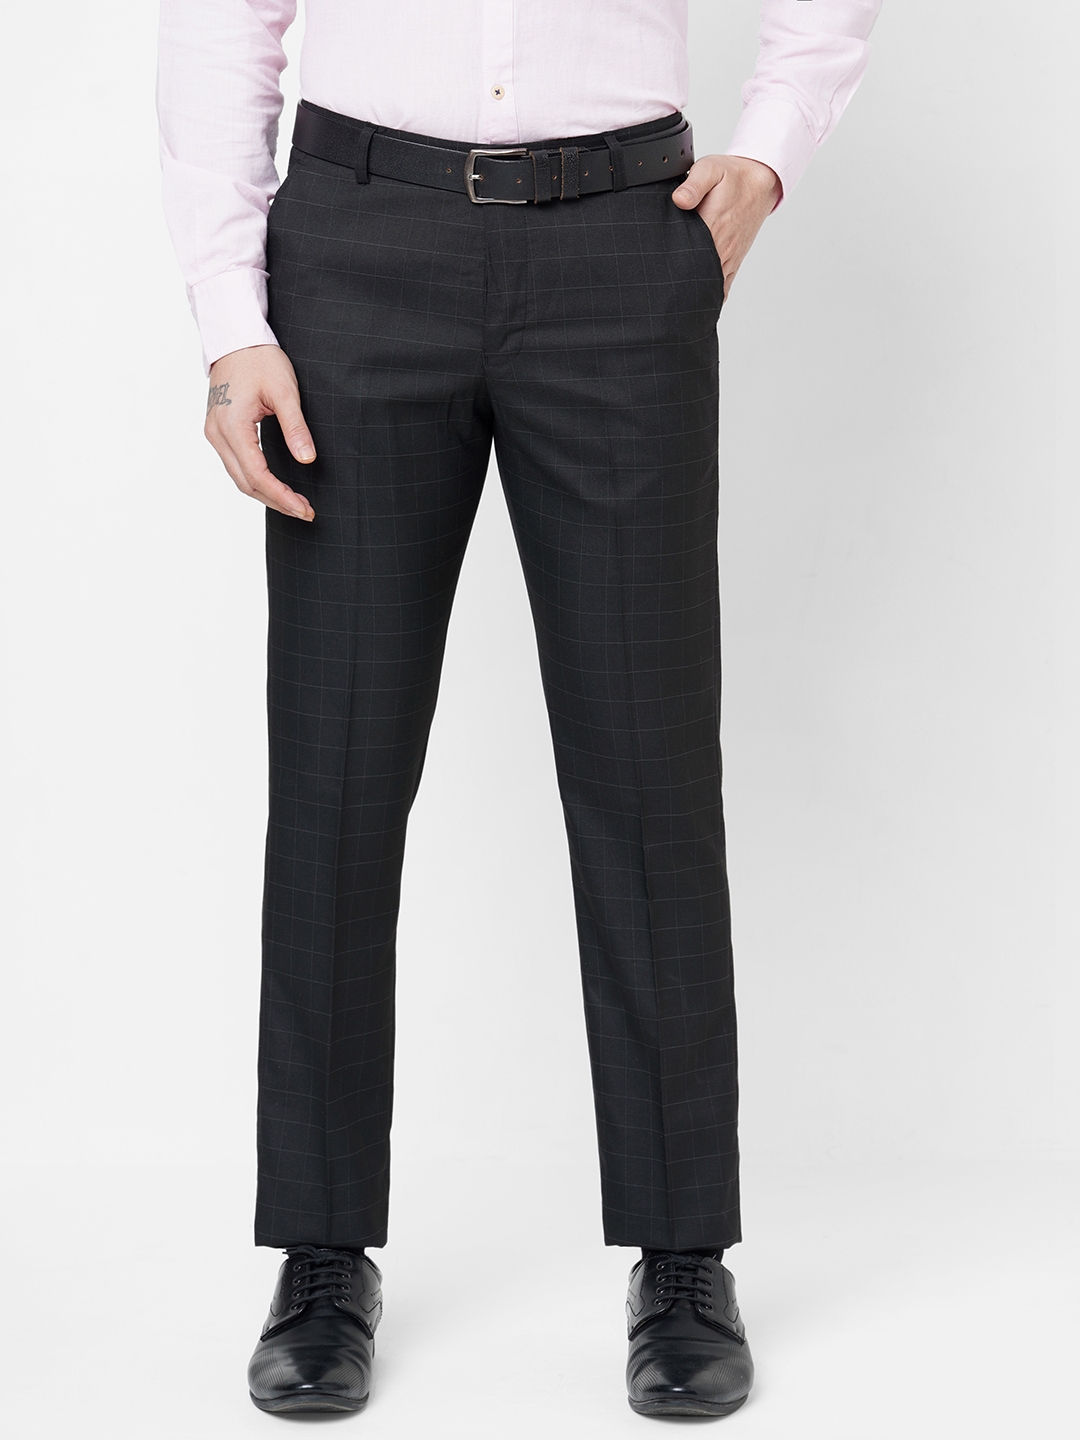 Men's Black Polyester Checked Flat Front Formal Trousers